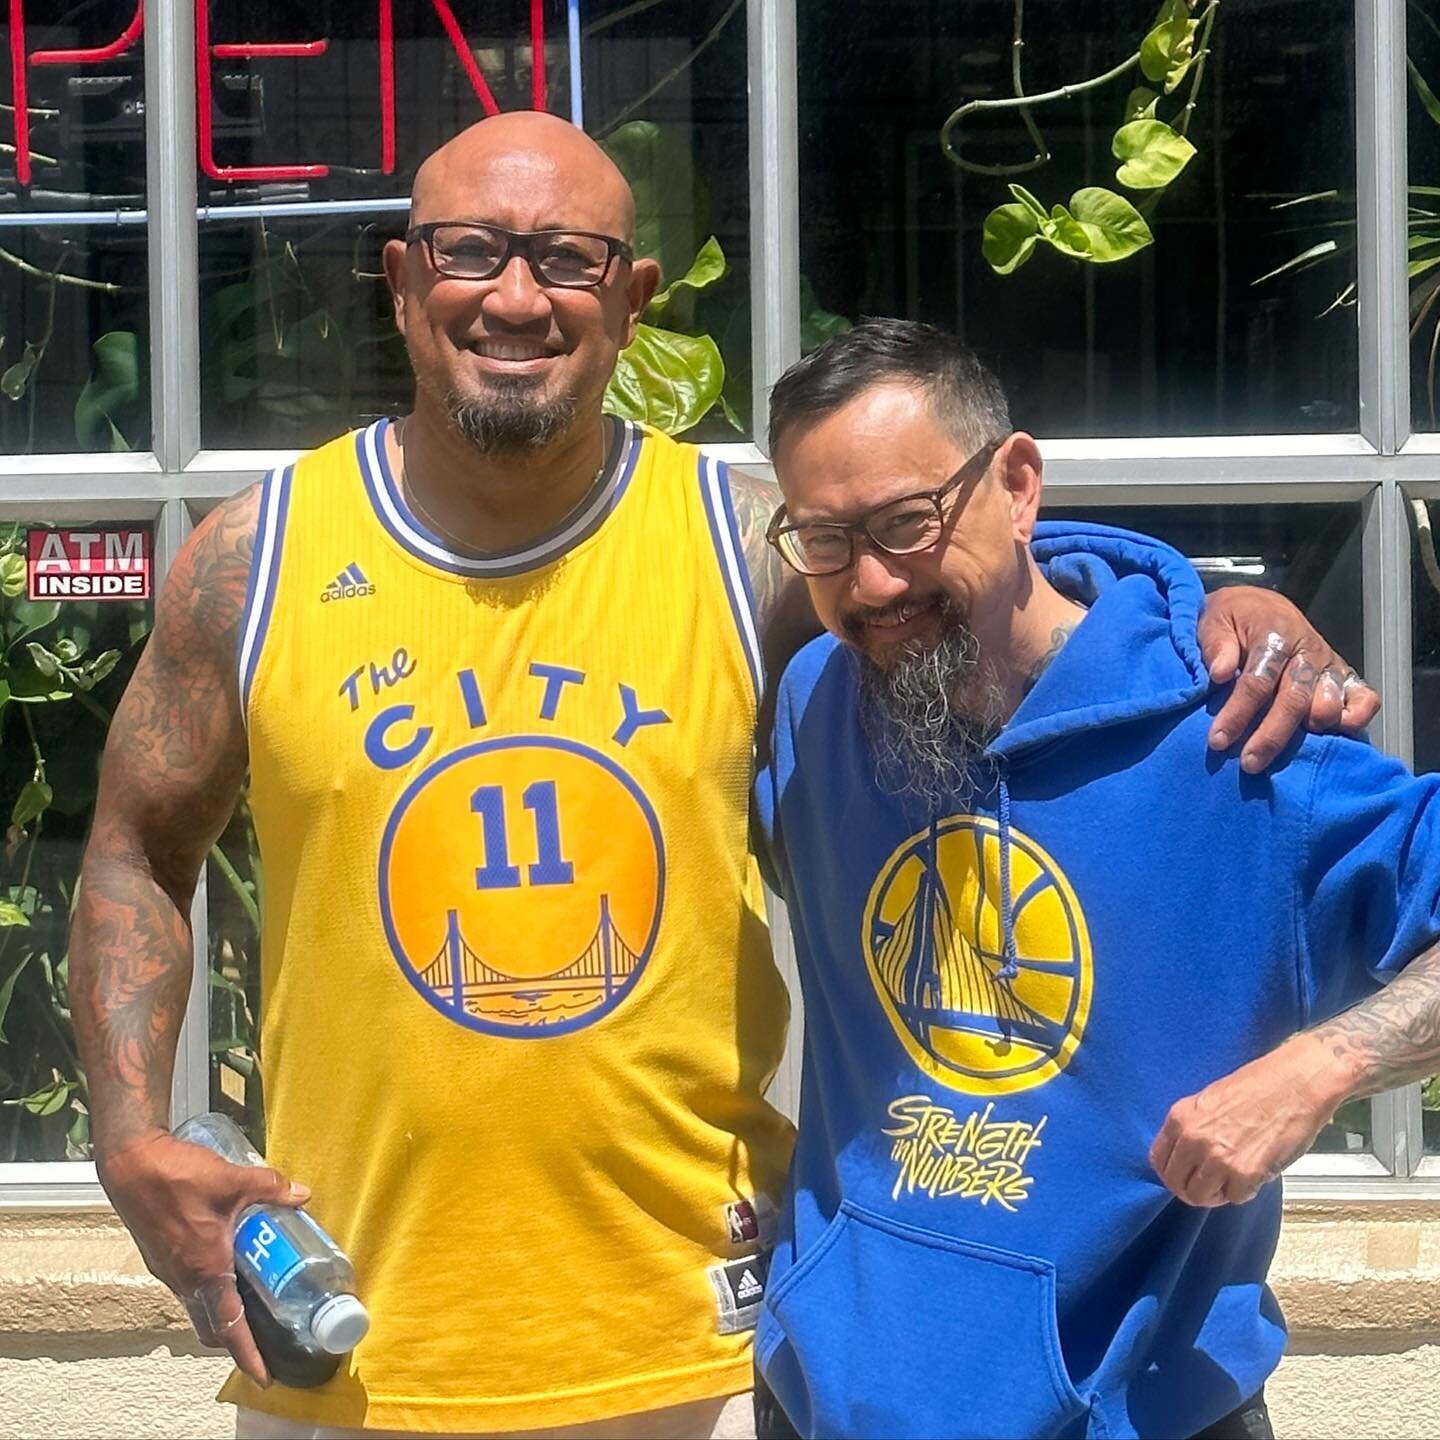 Thanks for stopping by from #sacramento to rep the #warriors #oakland #tattoos